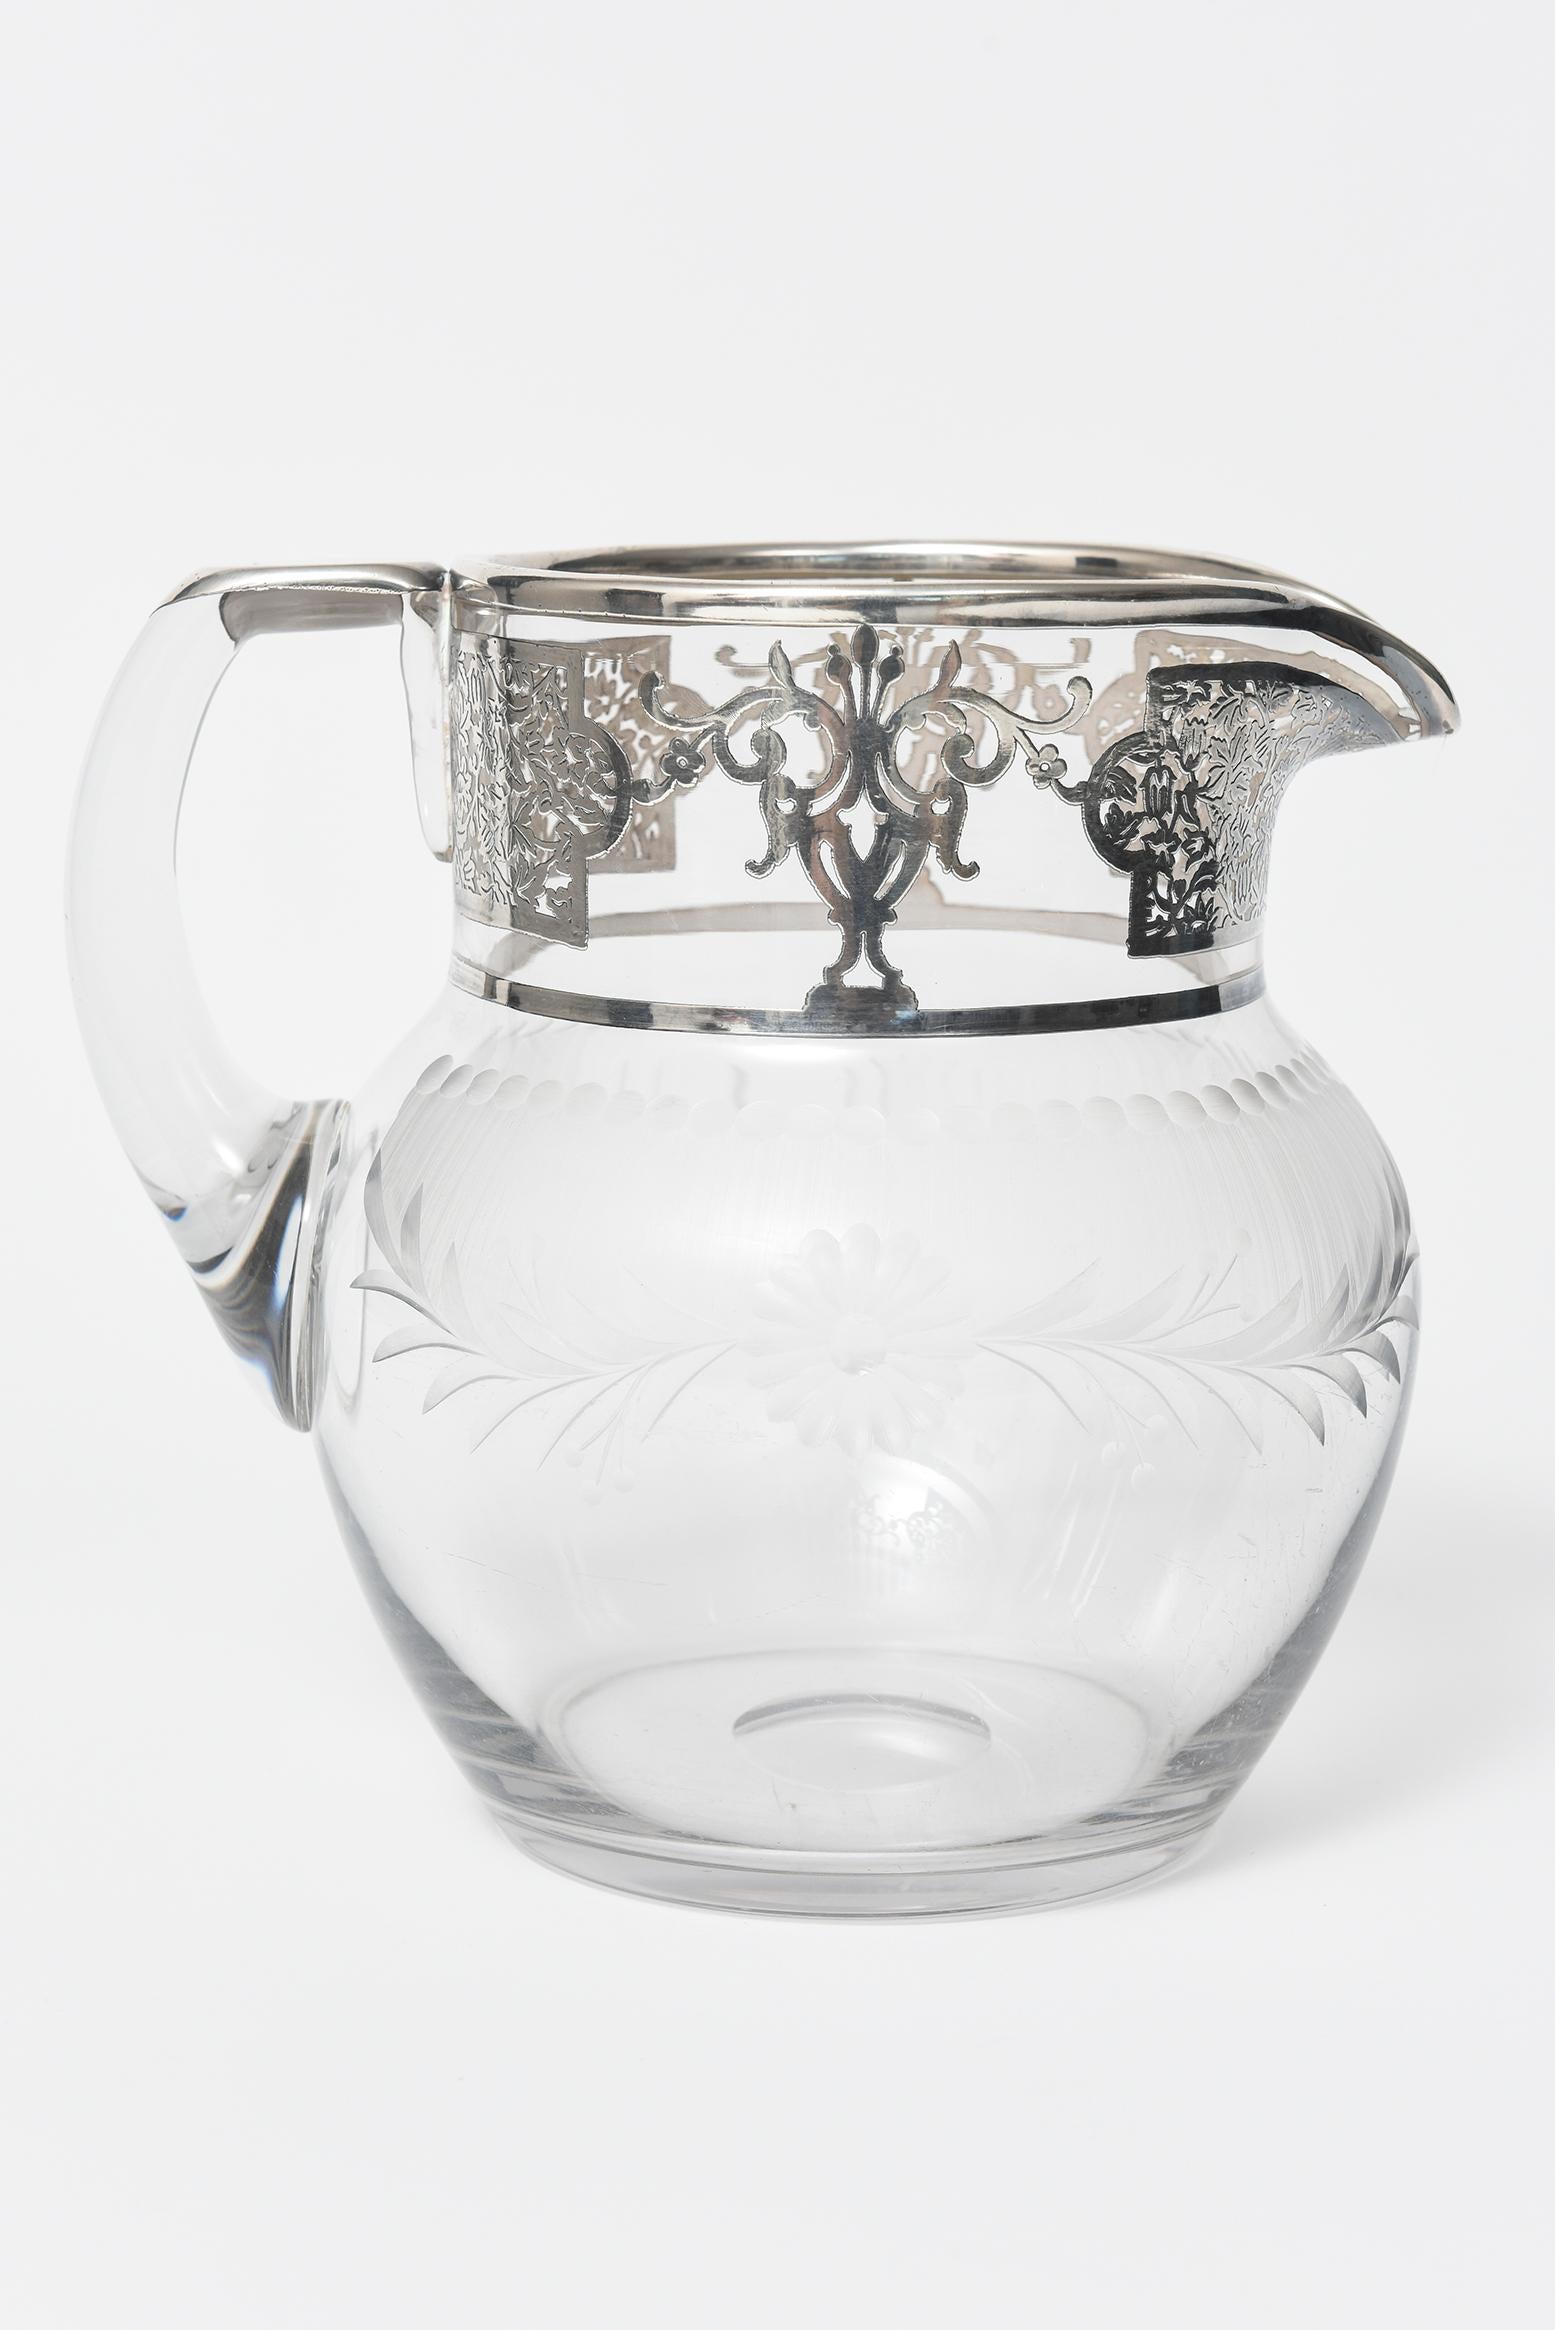 Silver Overlay Floral Etched Clear Glass Water Pitcher Jug Decanter In Fair Condition For Sale In Miami Beach, FL